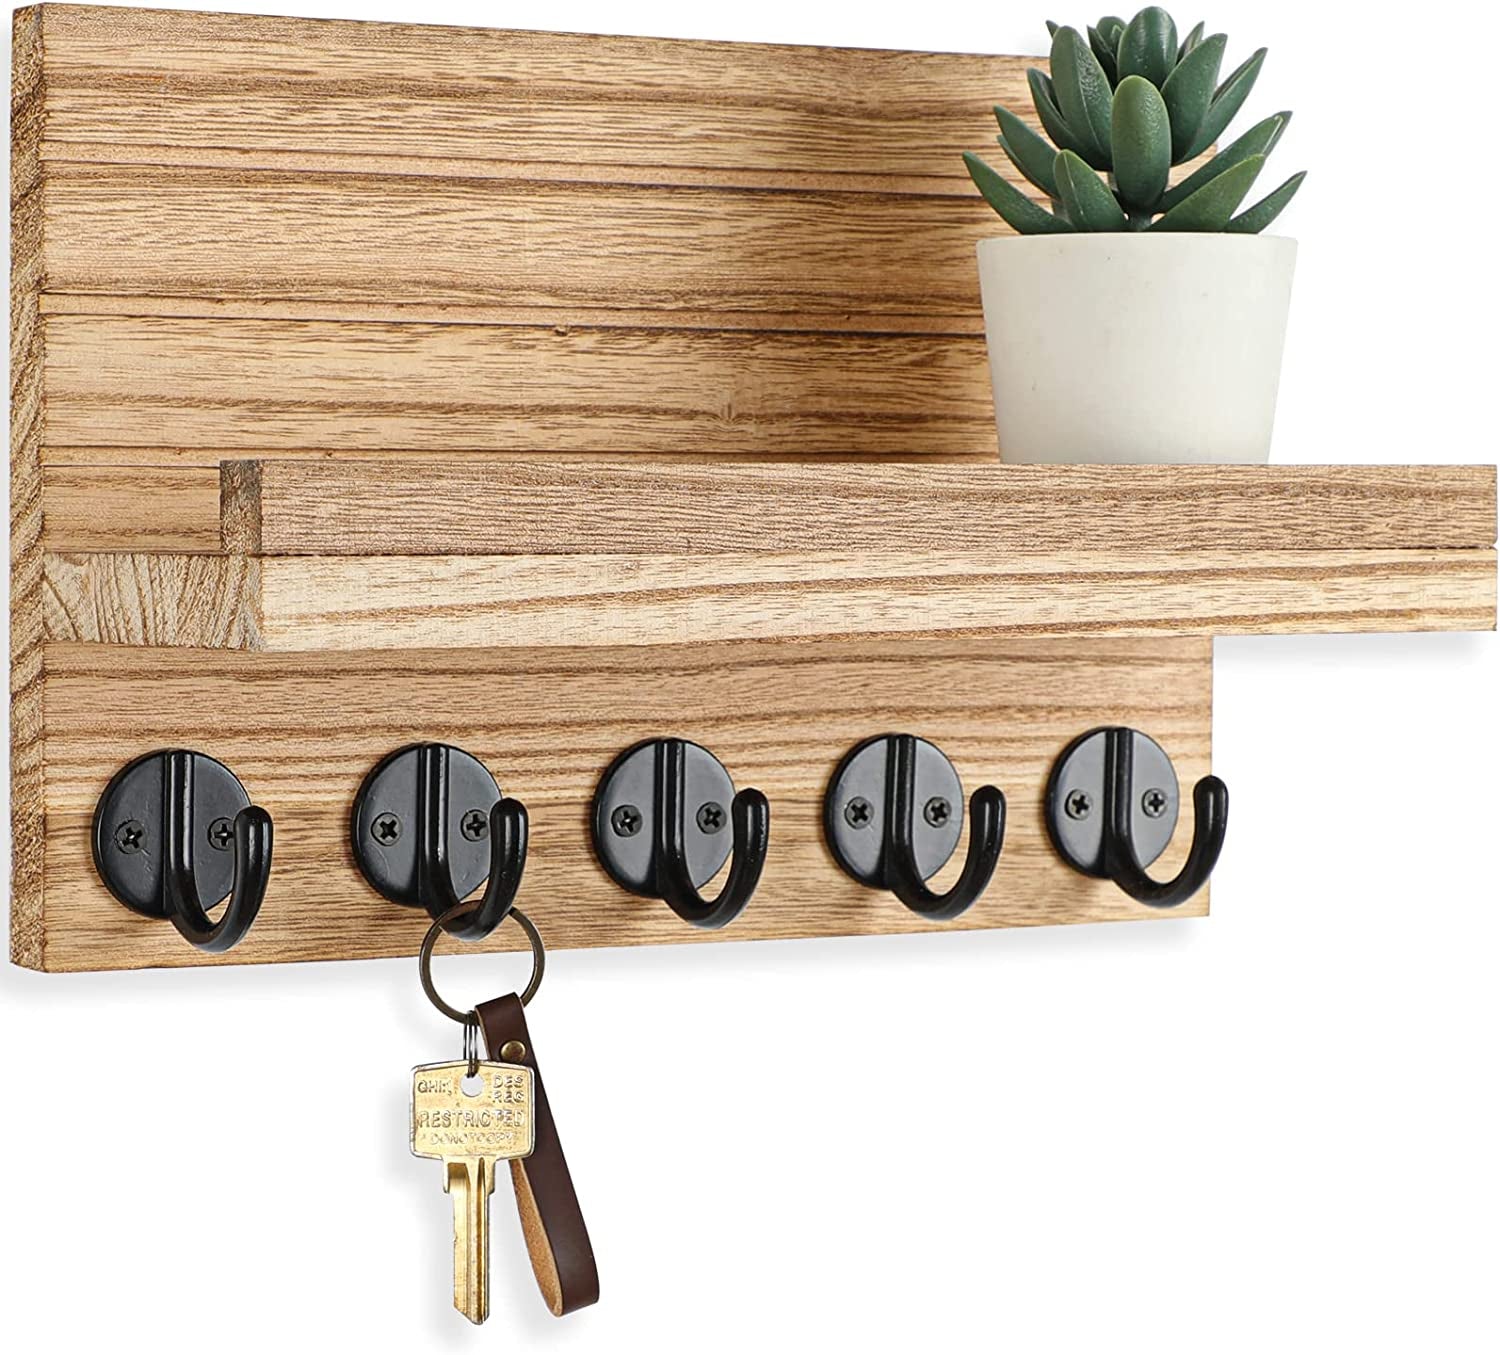 Key Holder for Wall, Decorative Key and Mail Holder with Shelf Has Large Key Hooks for Bags, Coats, Umbrella – Paulownia Wood Key Hanger with Mounting Hardware (9.8”W X 6.7”H X 4.2”D)